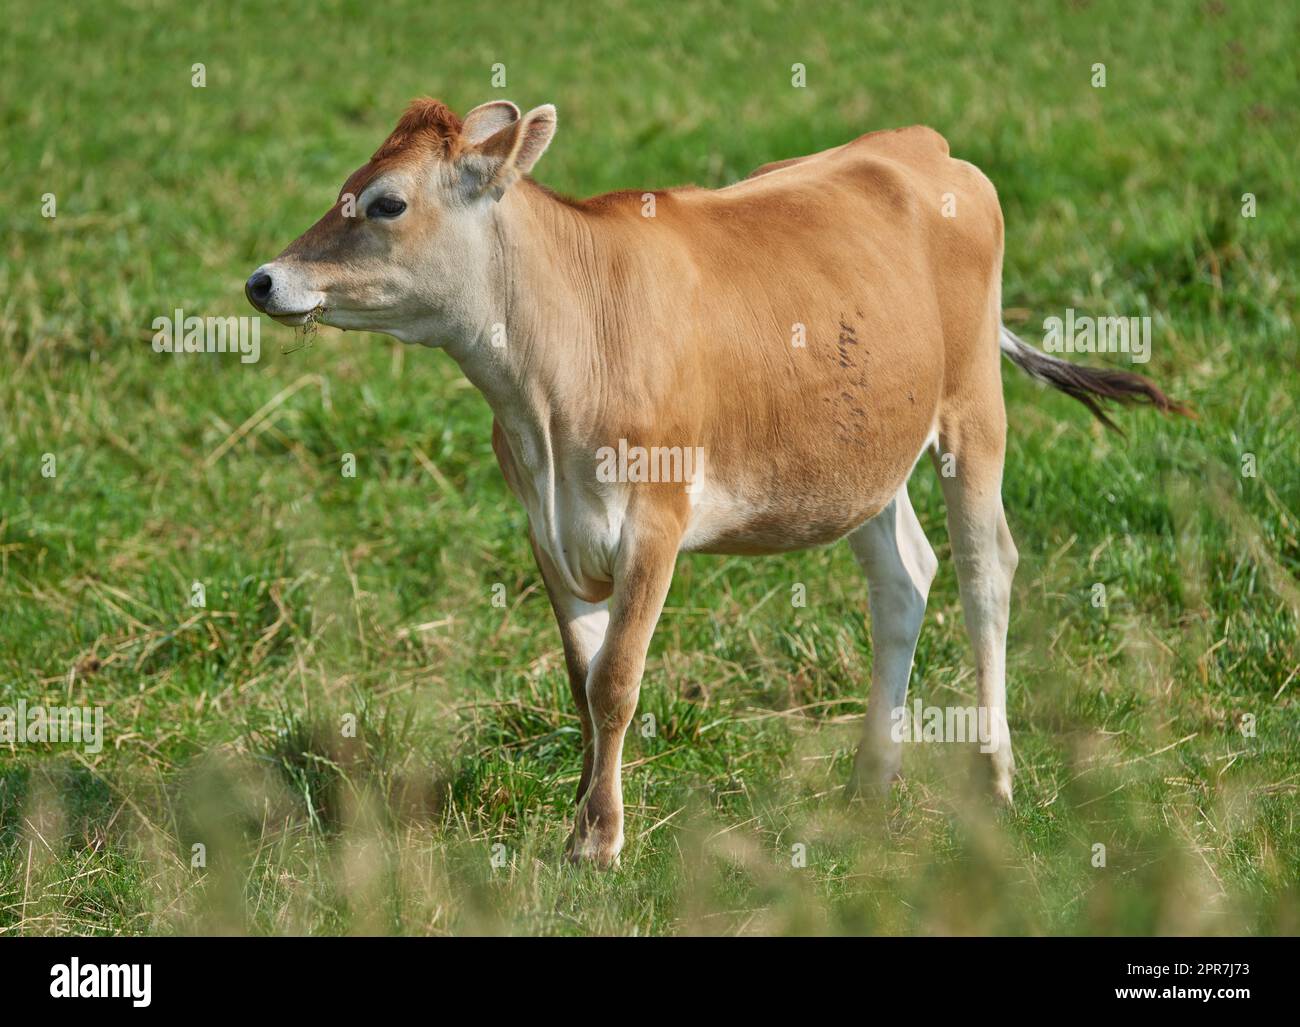 One brown and white cow on a green field in a rural countryside with copy space. Raising and breeding livestock cattle on a farm for the beef and dairy industry. Landscape with animals in nature Stock Photo